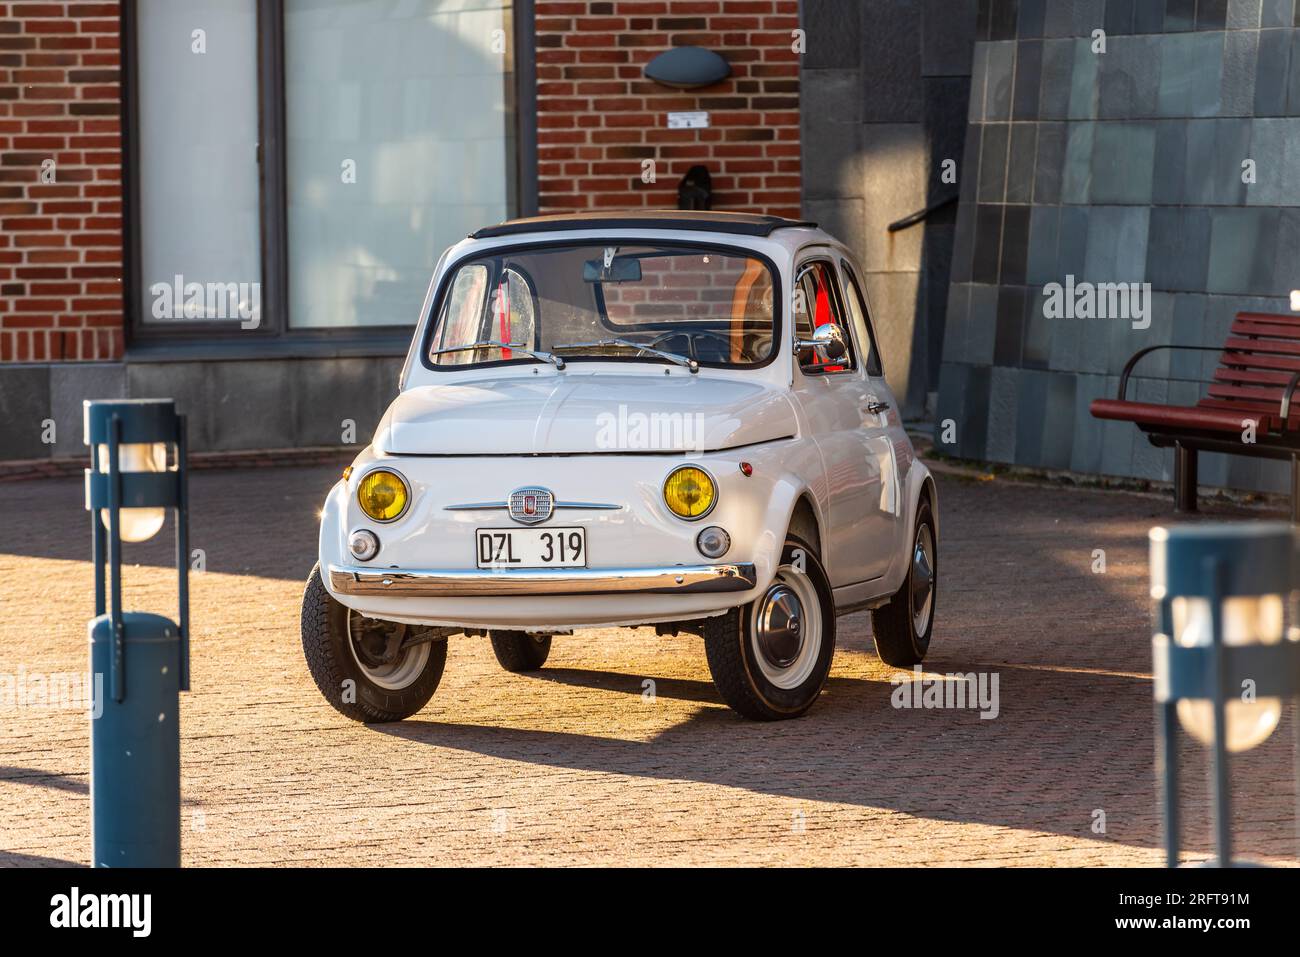 Gothenburg, Sweden - October 17 2021: A white 1972 Fiat 500 parked on a street. Stock Photo